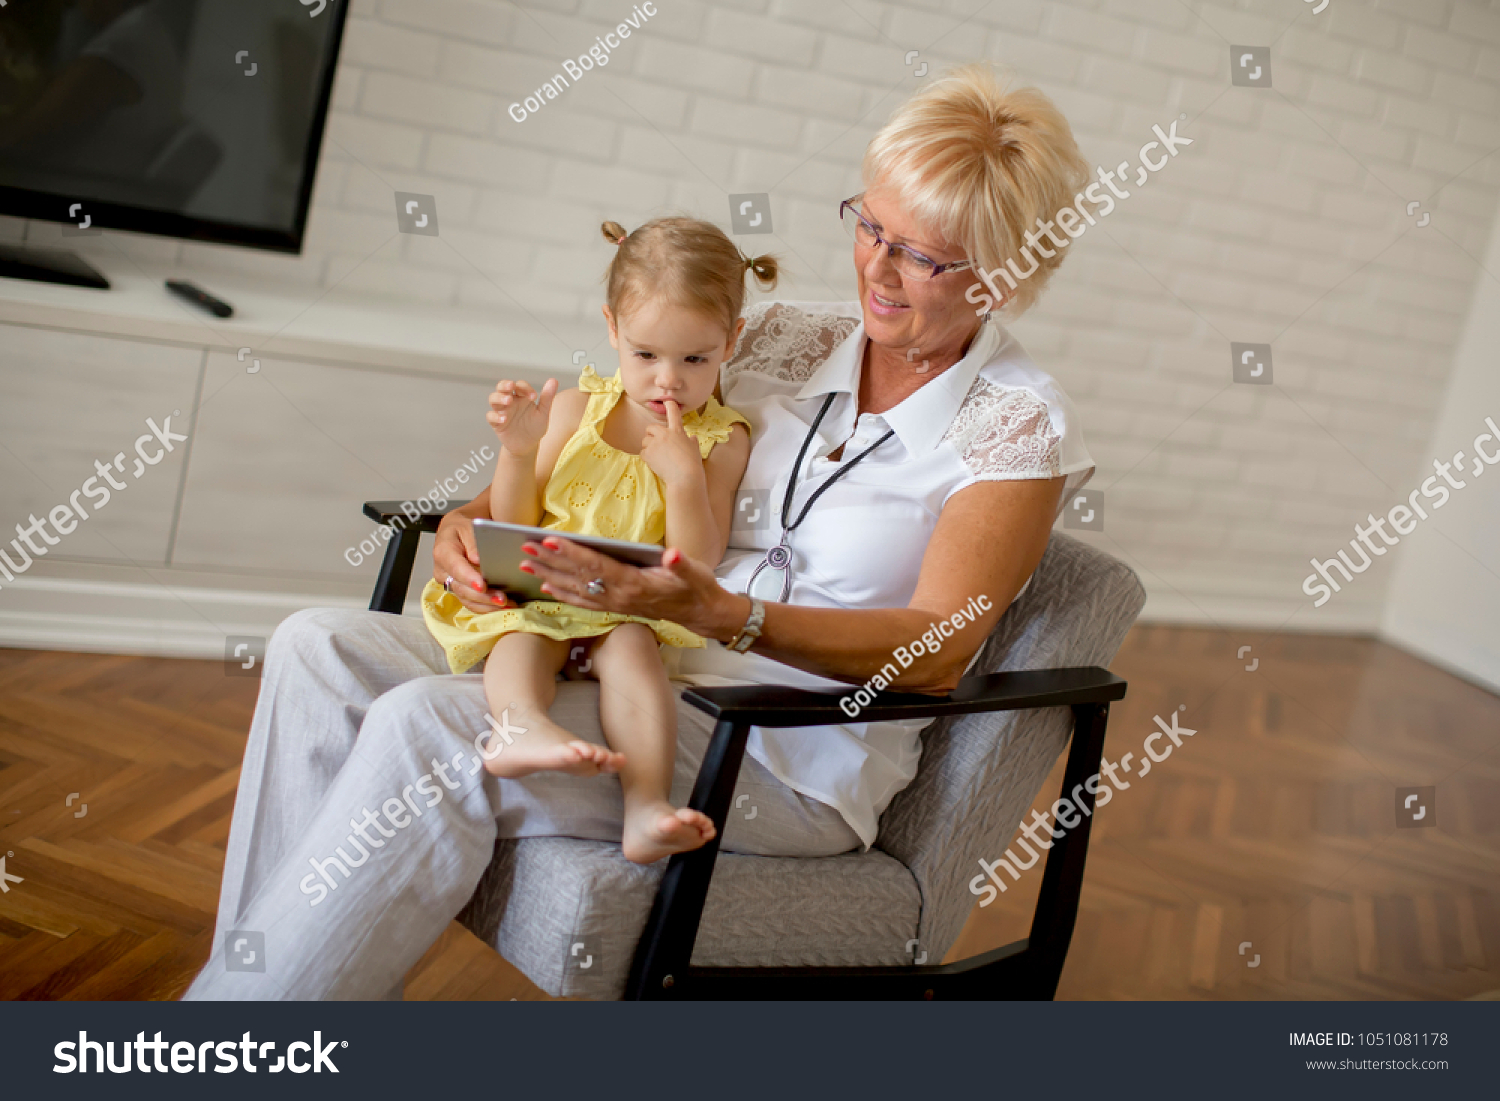 Grandmother reading book to little granddaughter in the room #1051081178